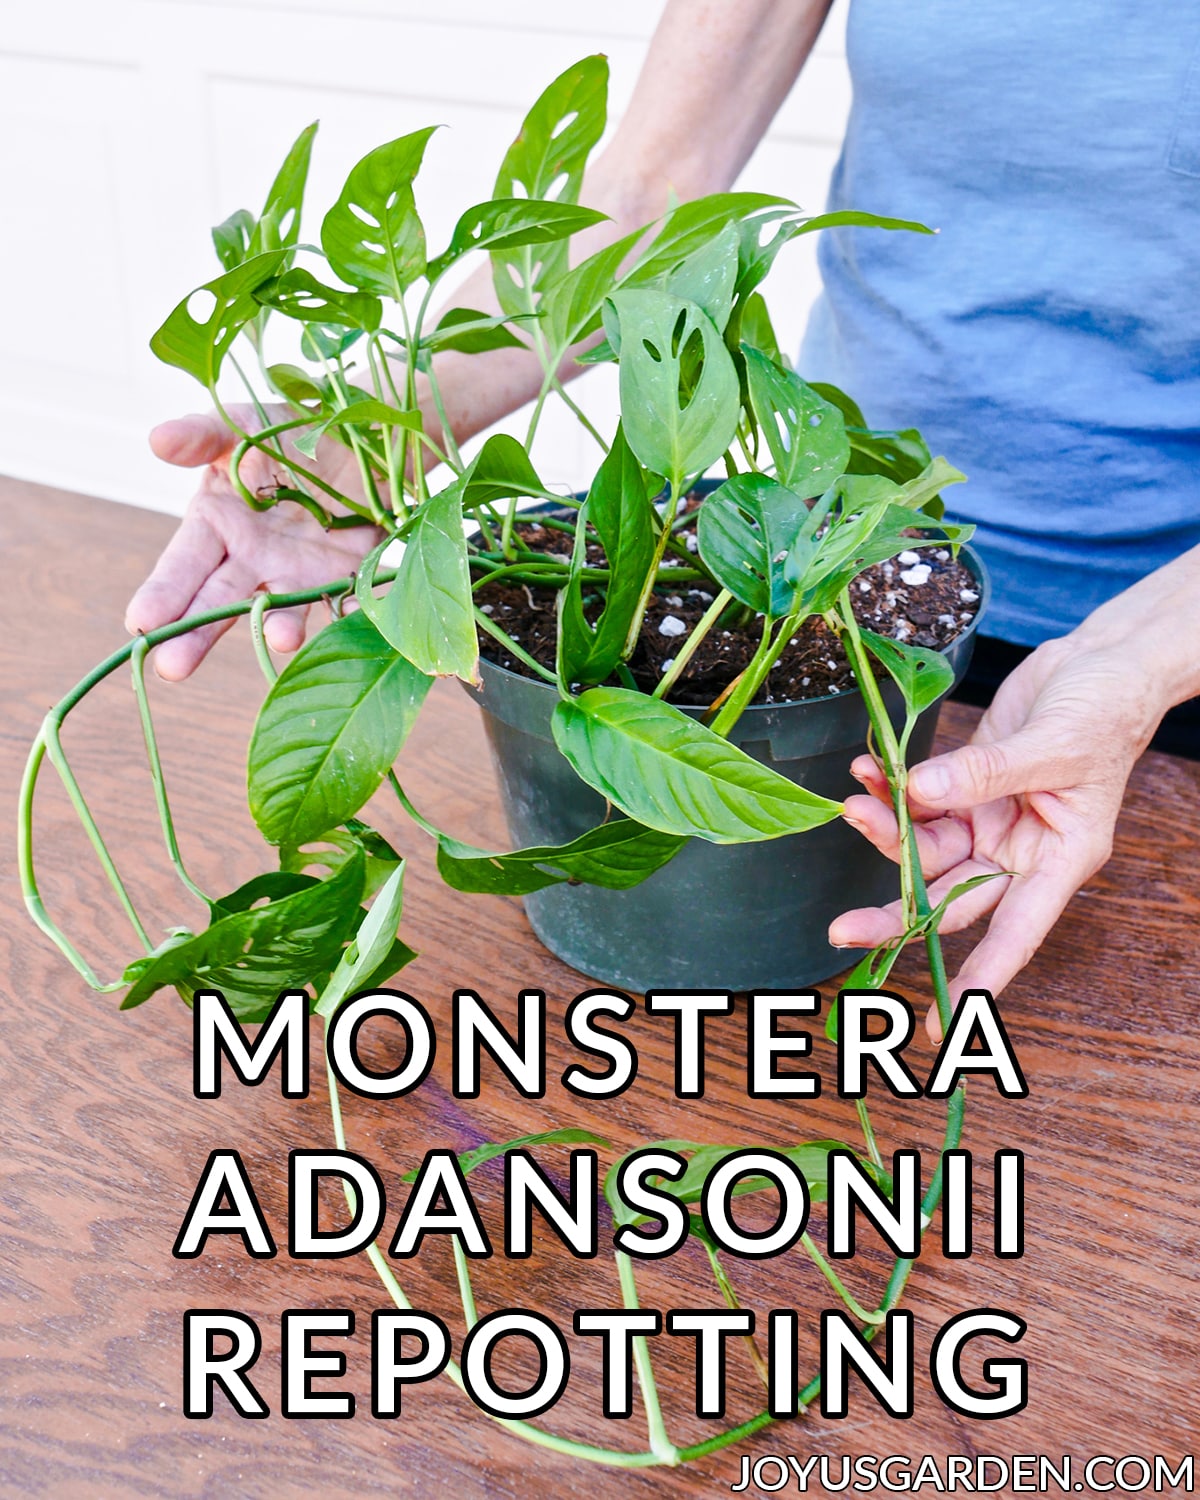  Monstera Adansonii Repotting: The Soil Mix To Use &amp; قدم کڻڻ